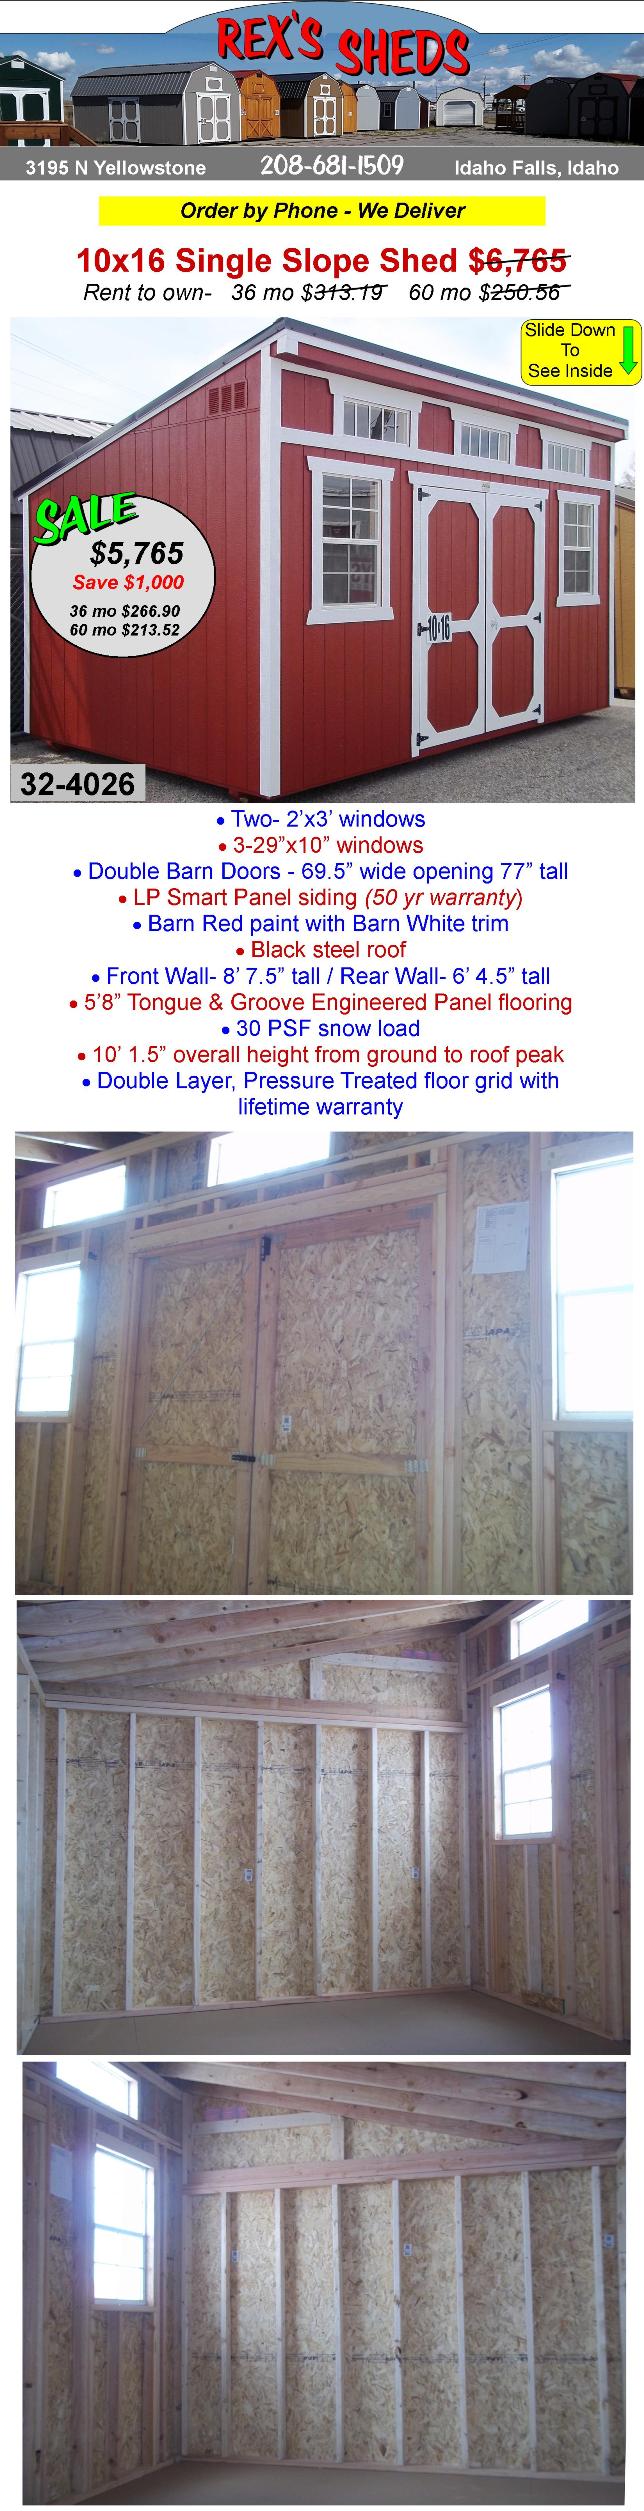 10x16_single_slope_shed_with_single_pitch_lean_to_type_roof_has_double_barn_doors_5_windows_barn_red_paint_barn_white_trim_black_steel_roof